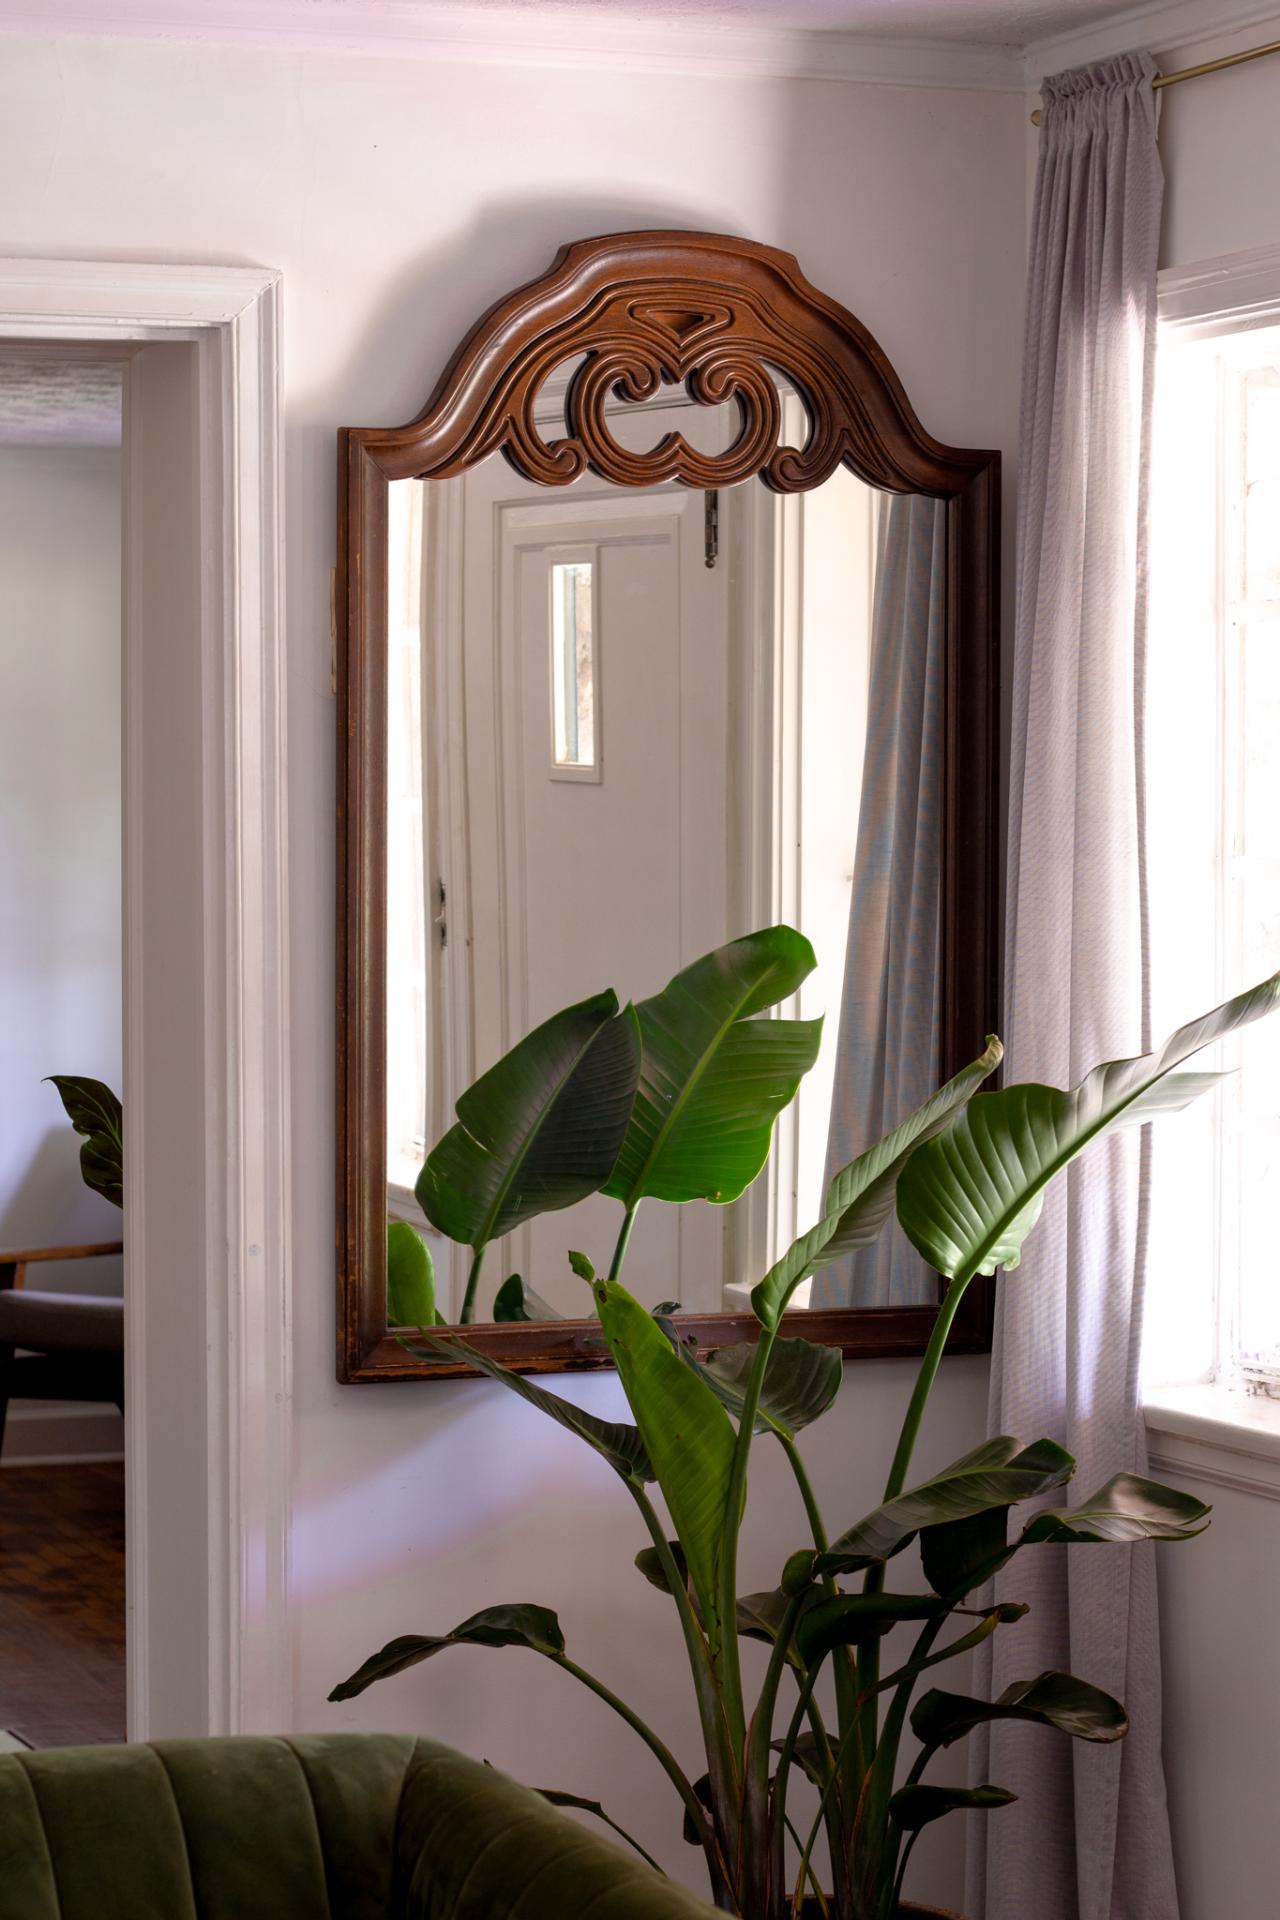 How To Hang A Heavy Mirror With, How To Hang A Mirror Angle From The Wall